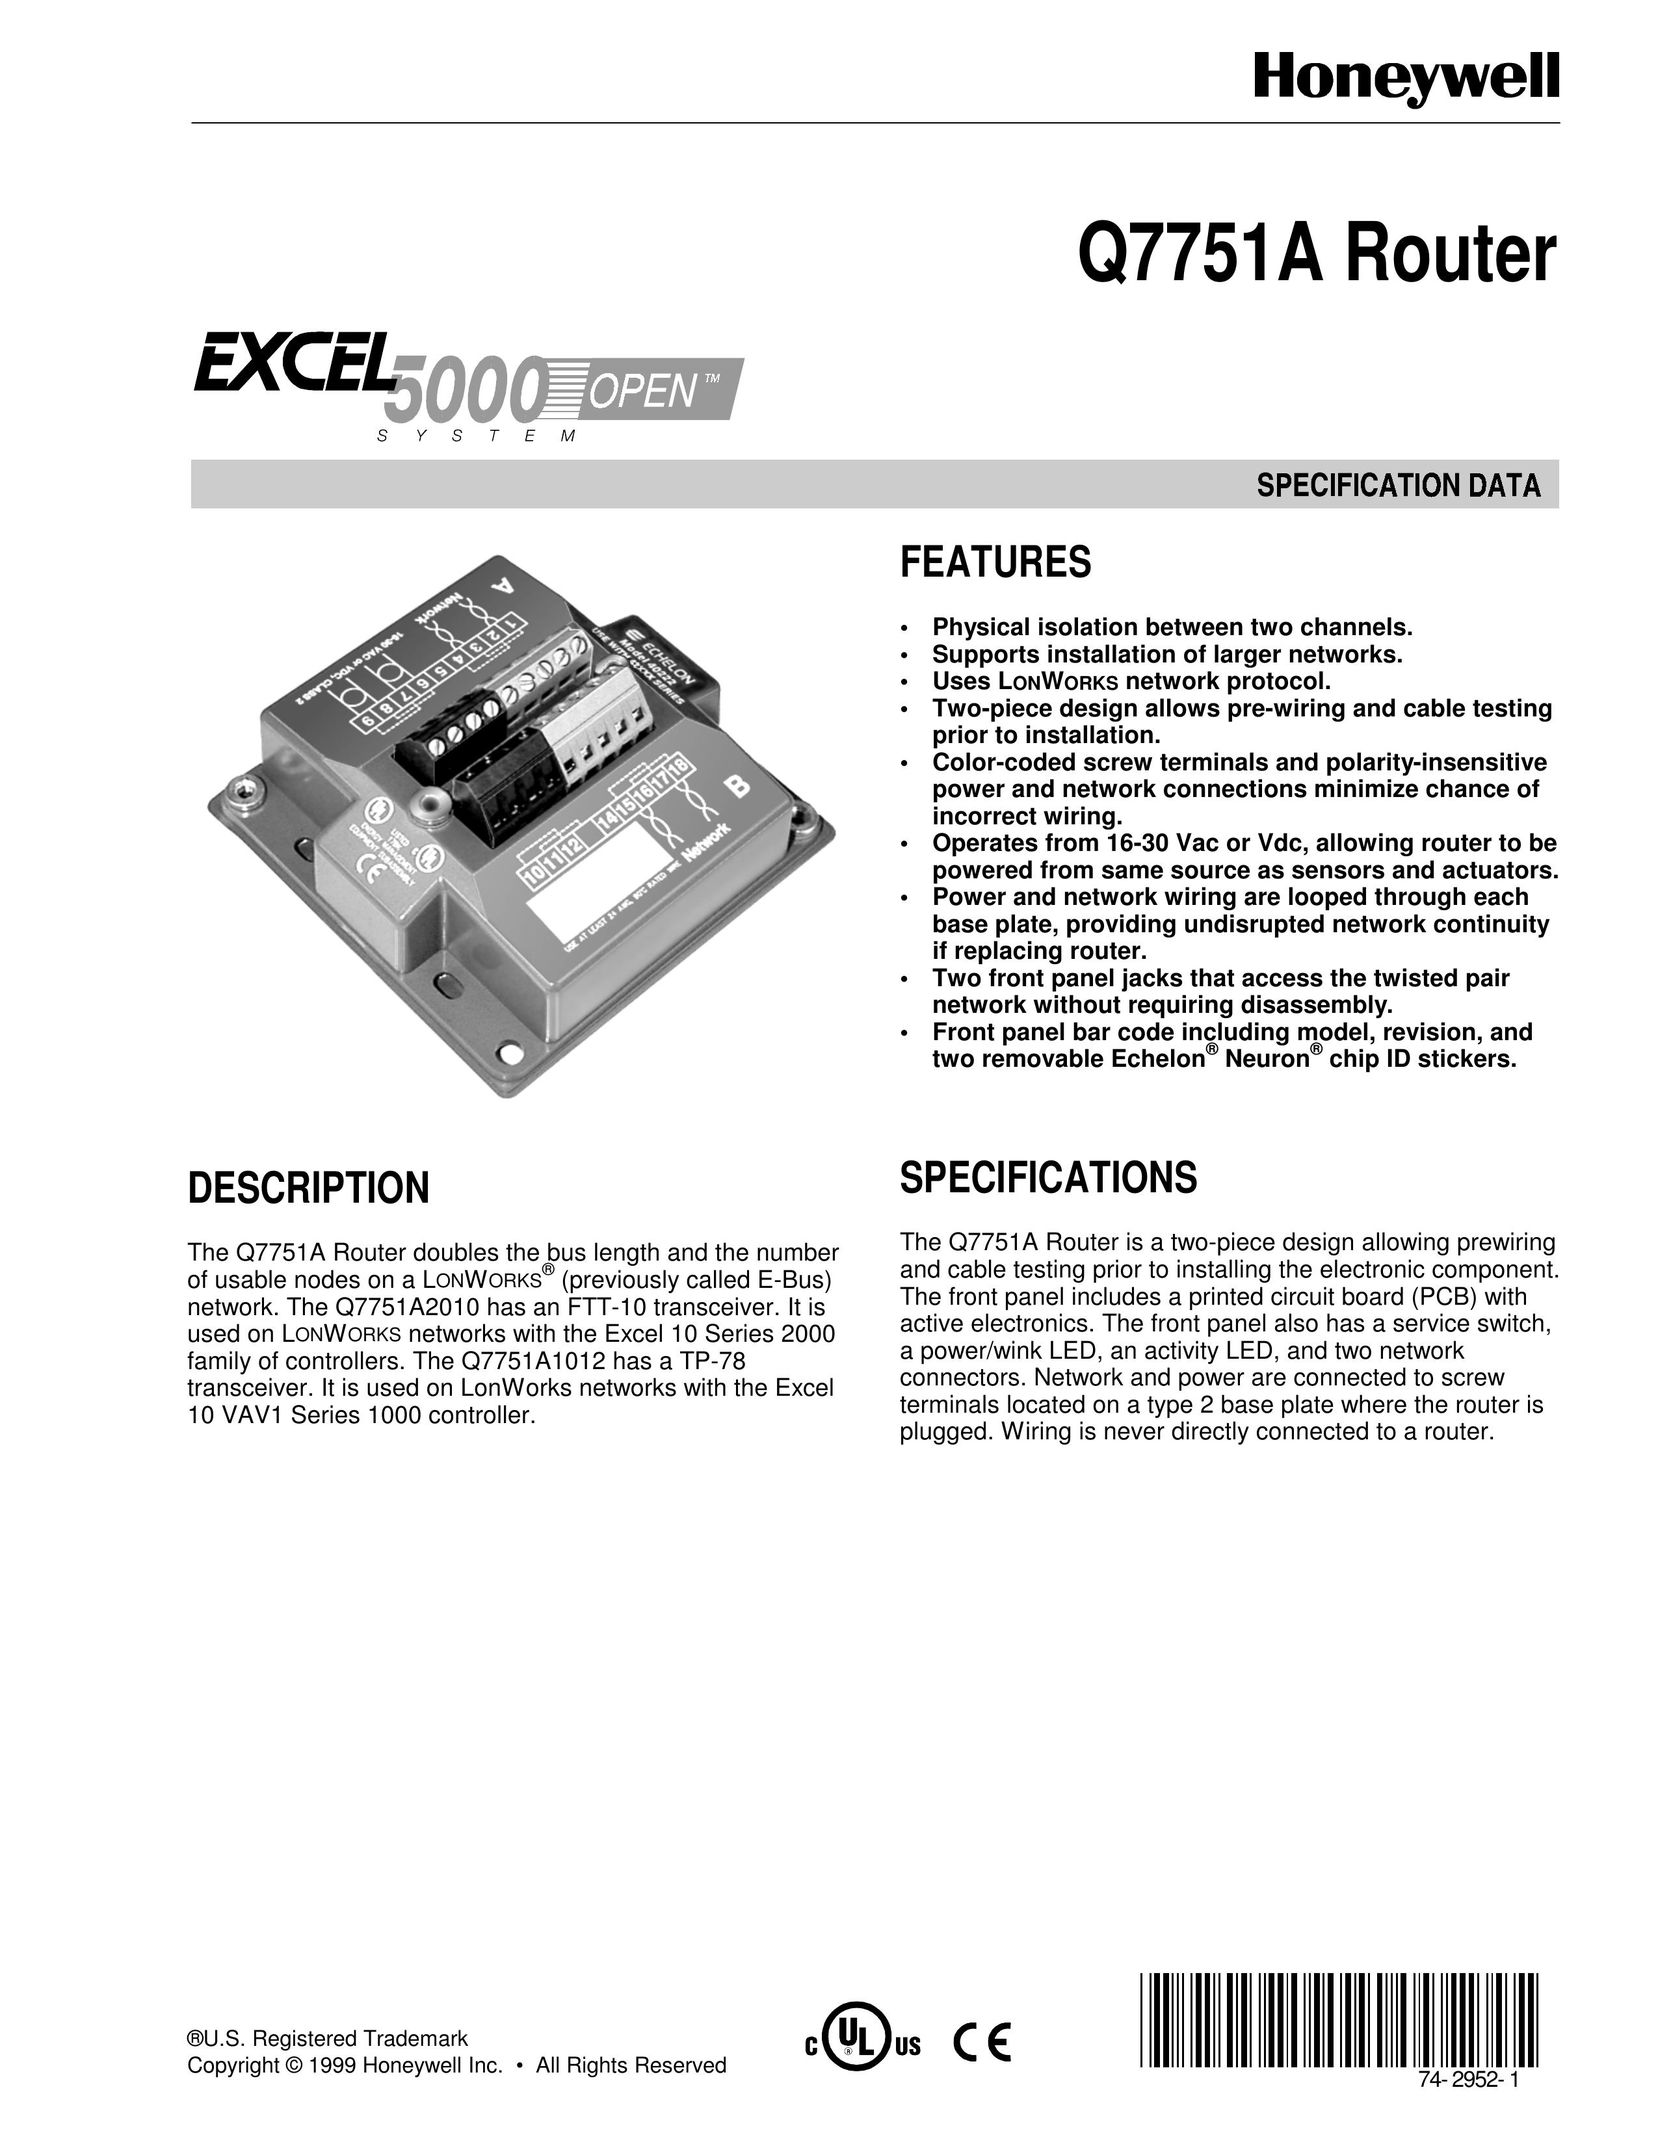 Honeywell Q7751A Network Router User Manual